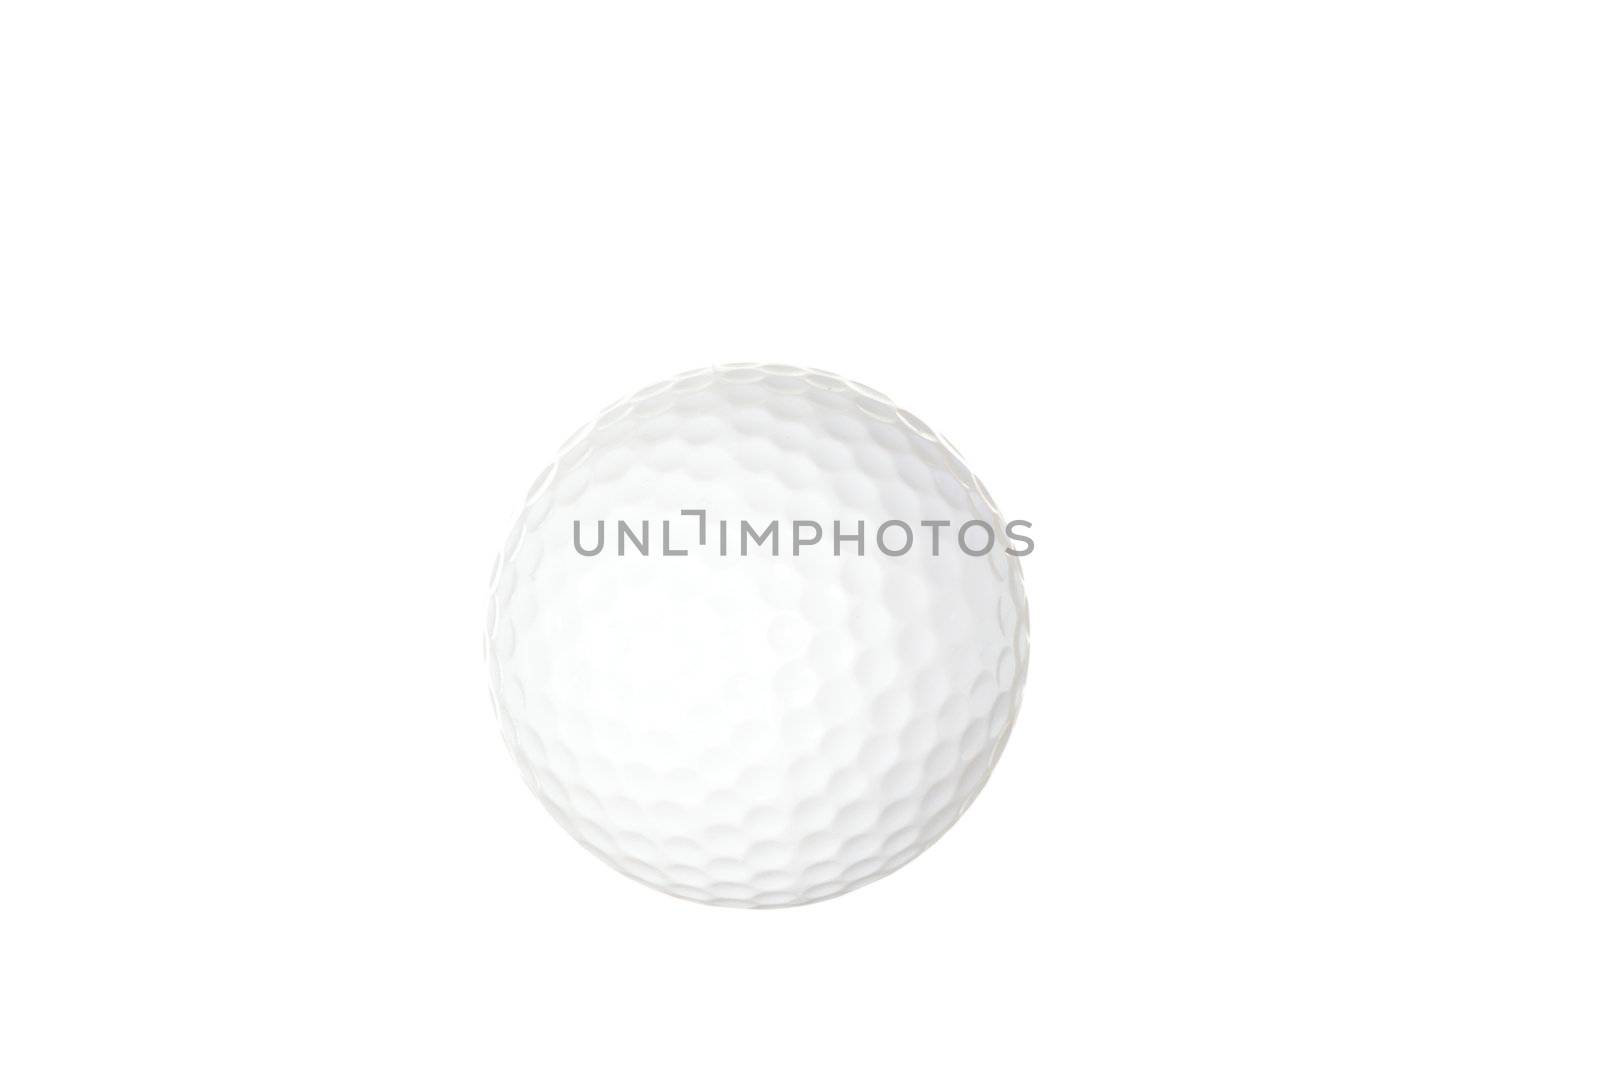 golf ball isolated on white background